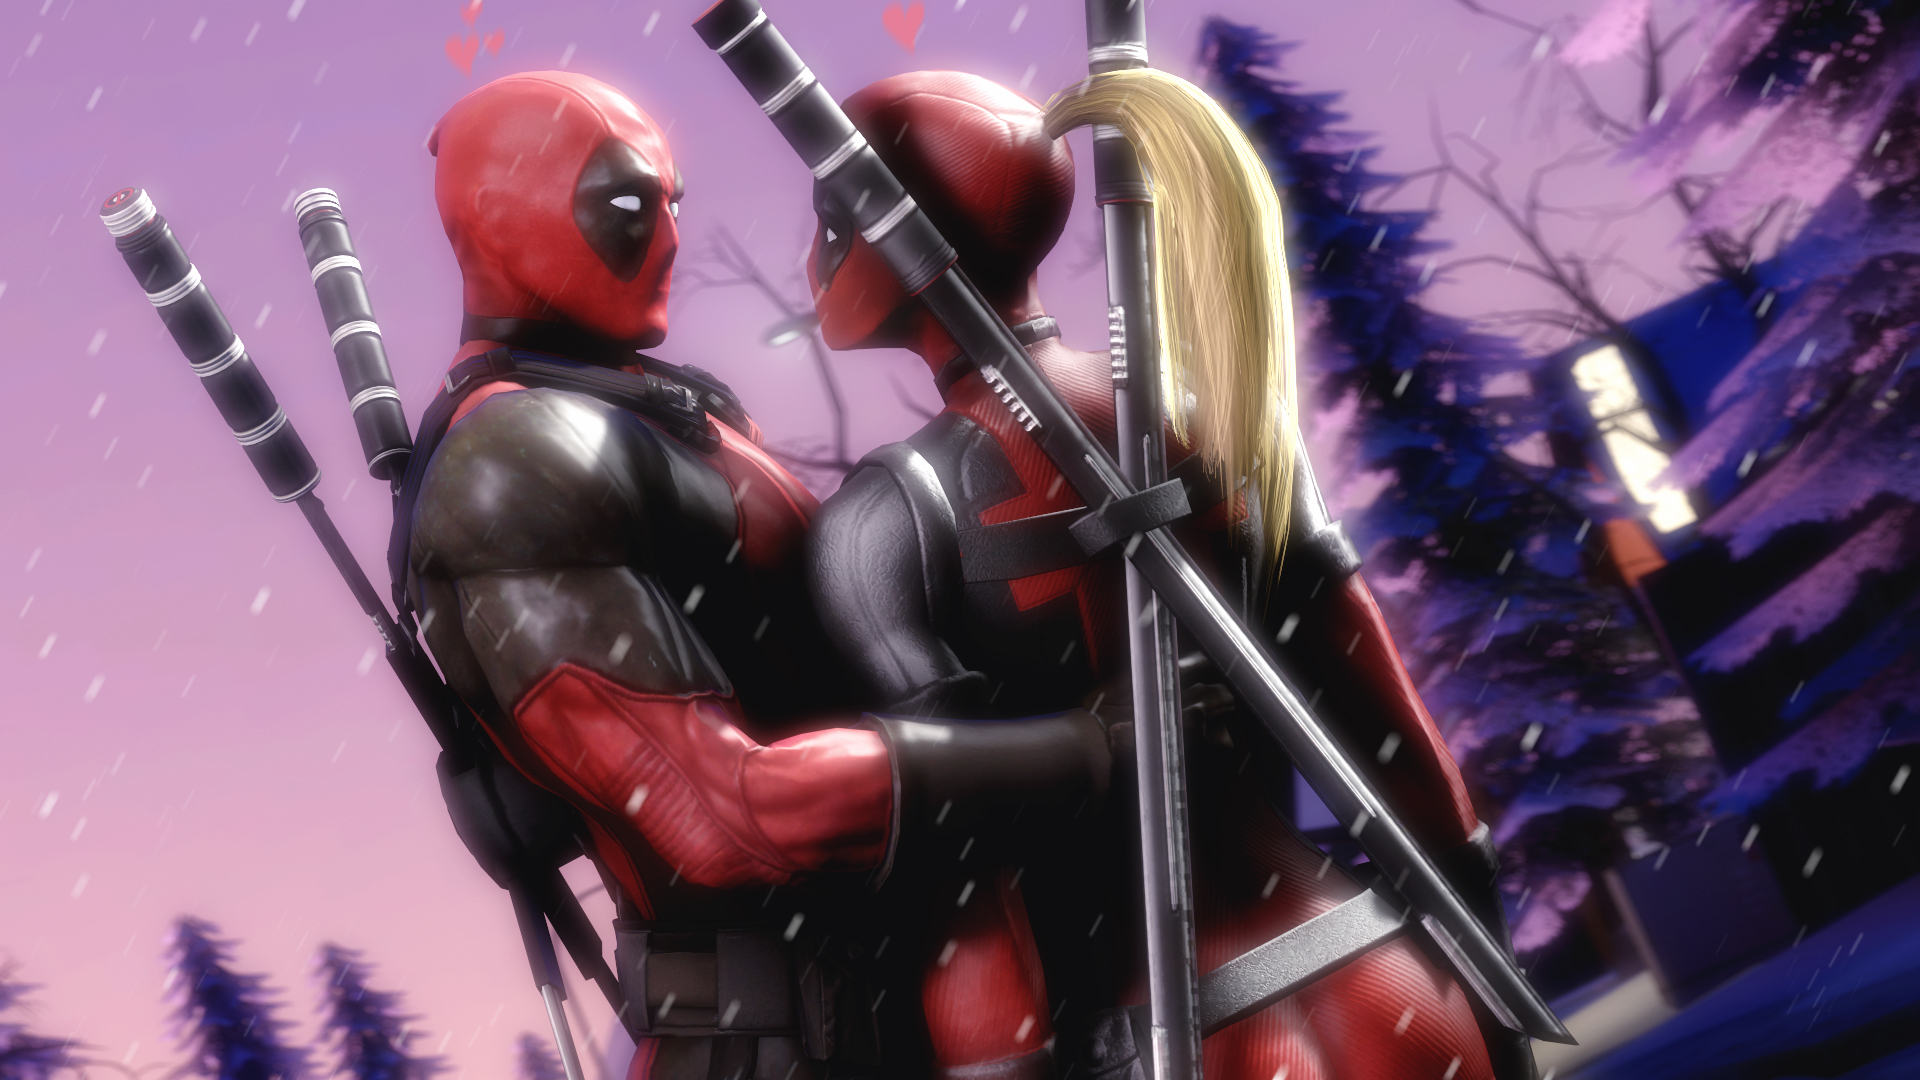 Lady Deadpool Full HD Wallpaper and Background Image | 1920x1080 | ID